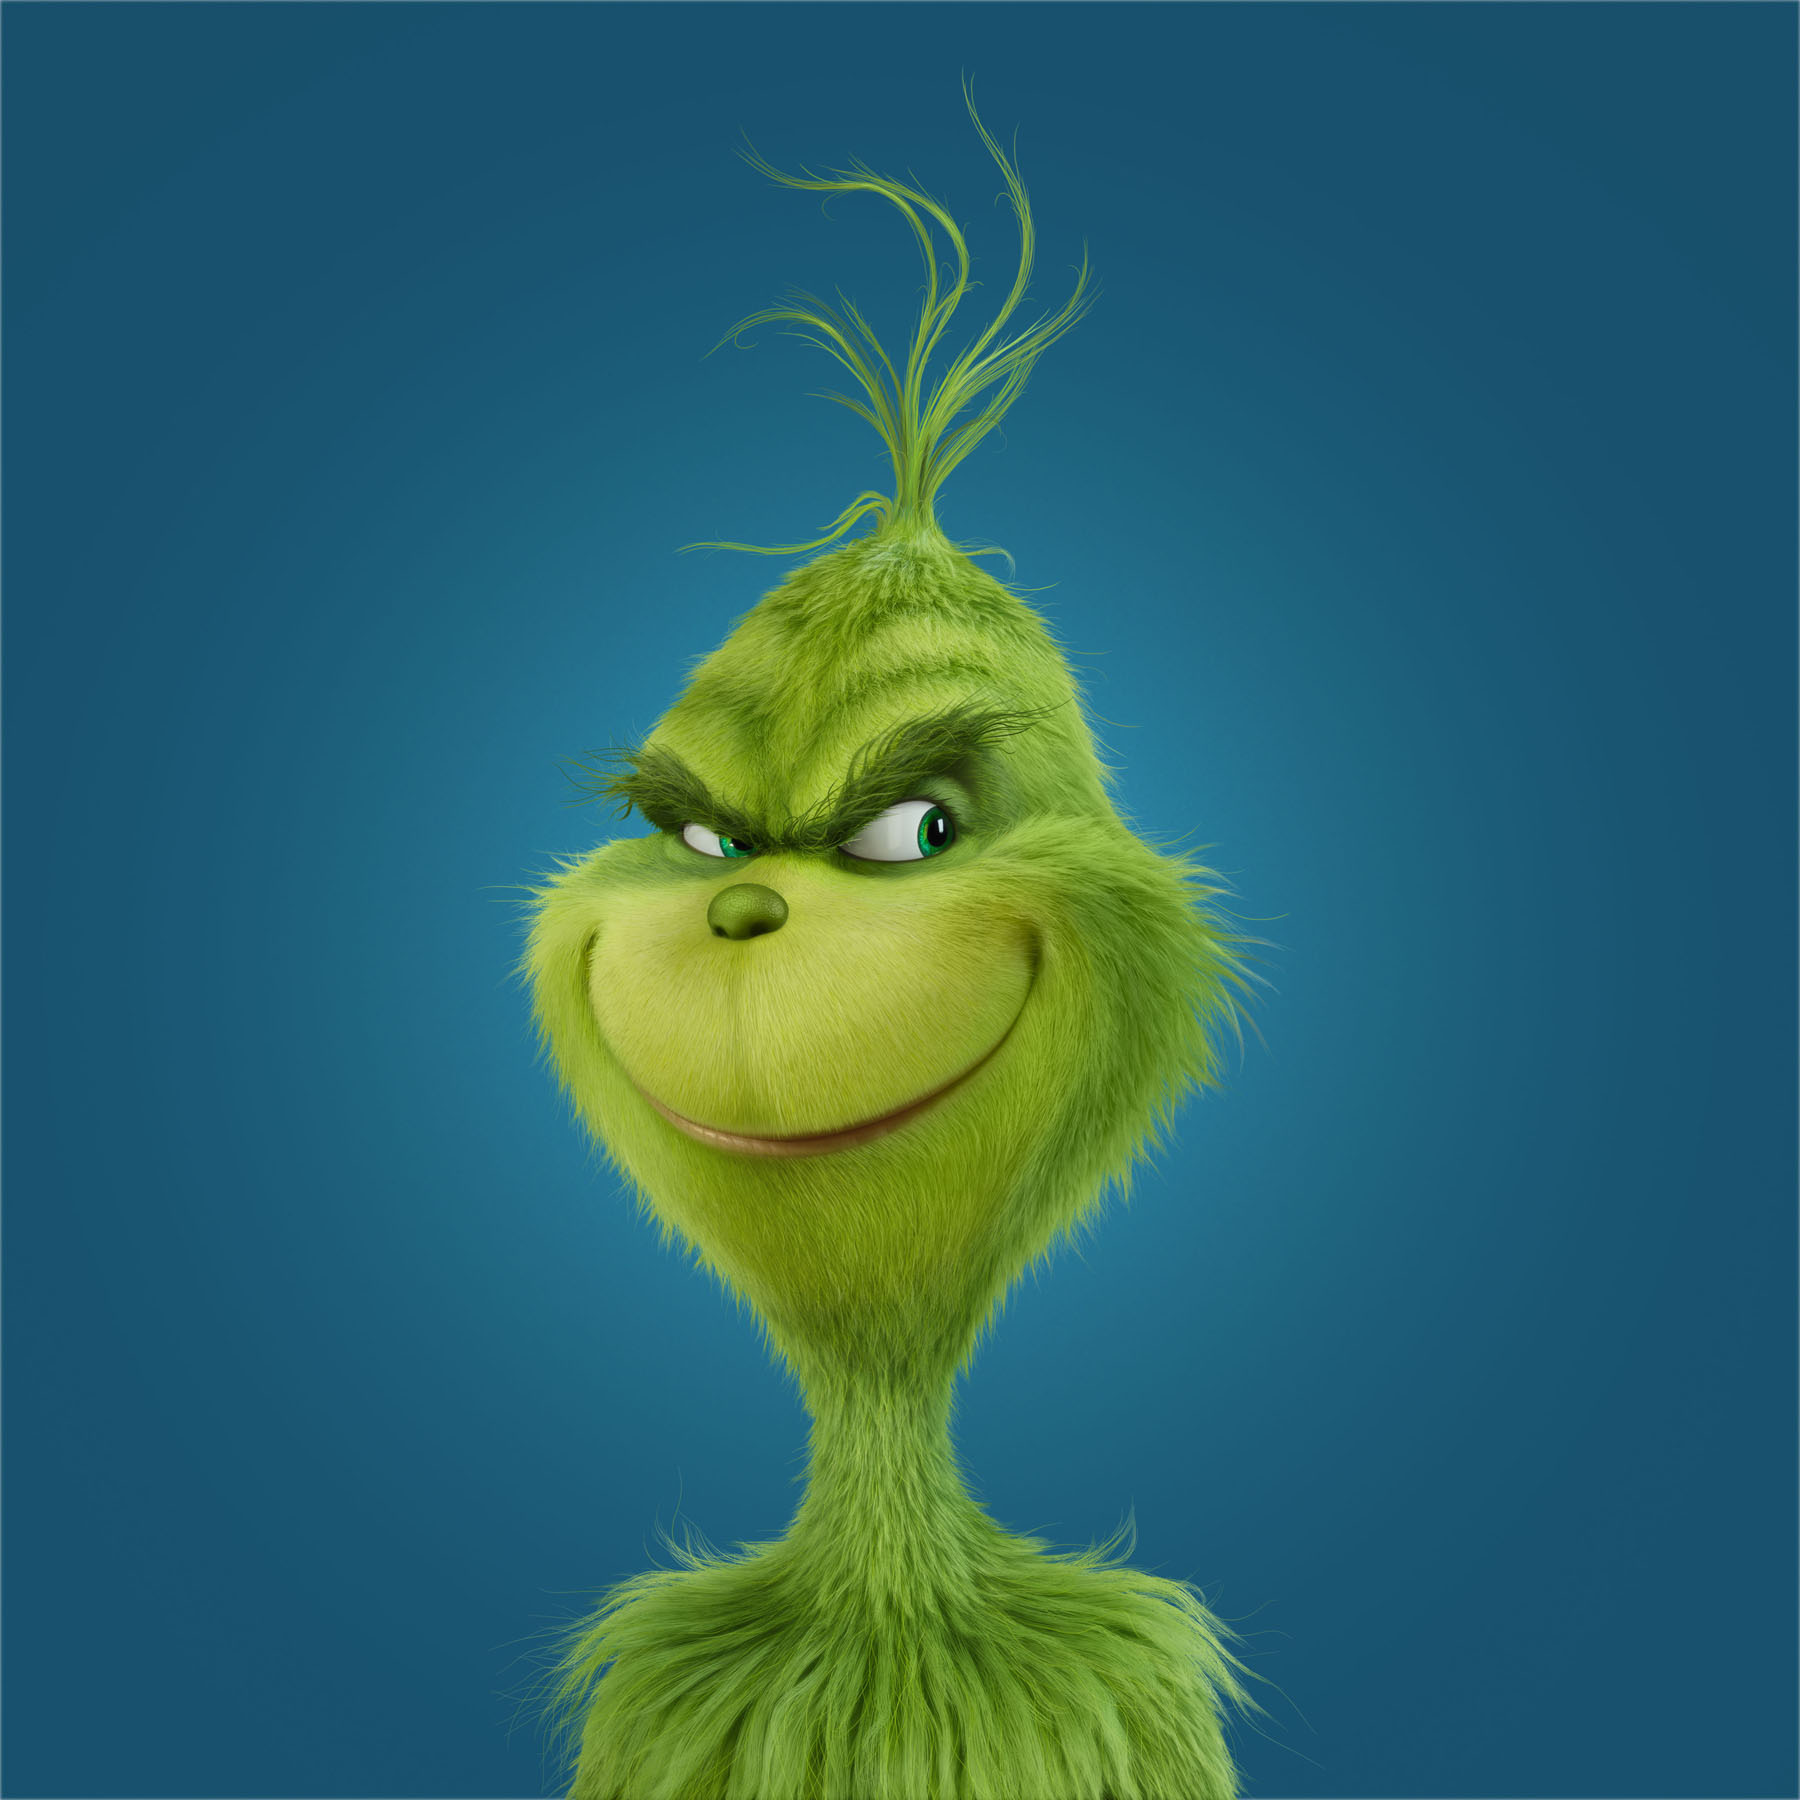 Earth Day Quiz Dr. Seuss' How the Grinch Stole Christmas